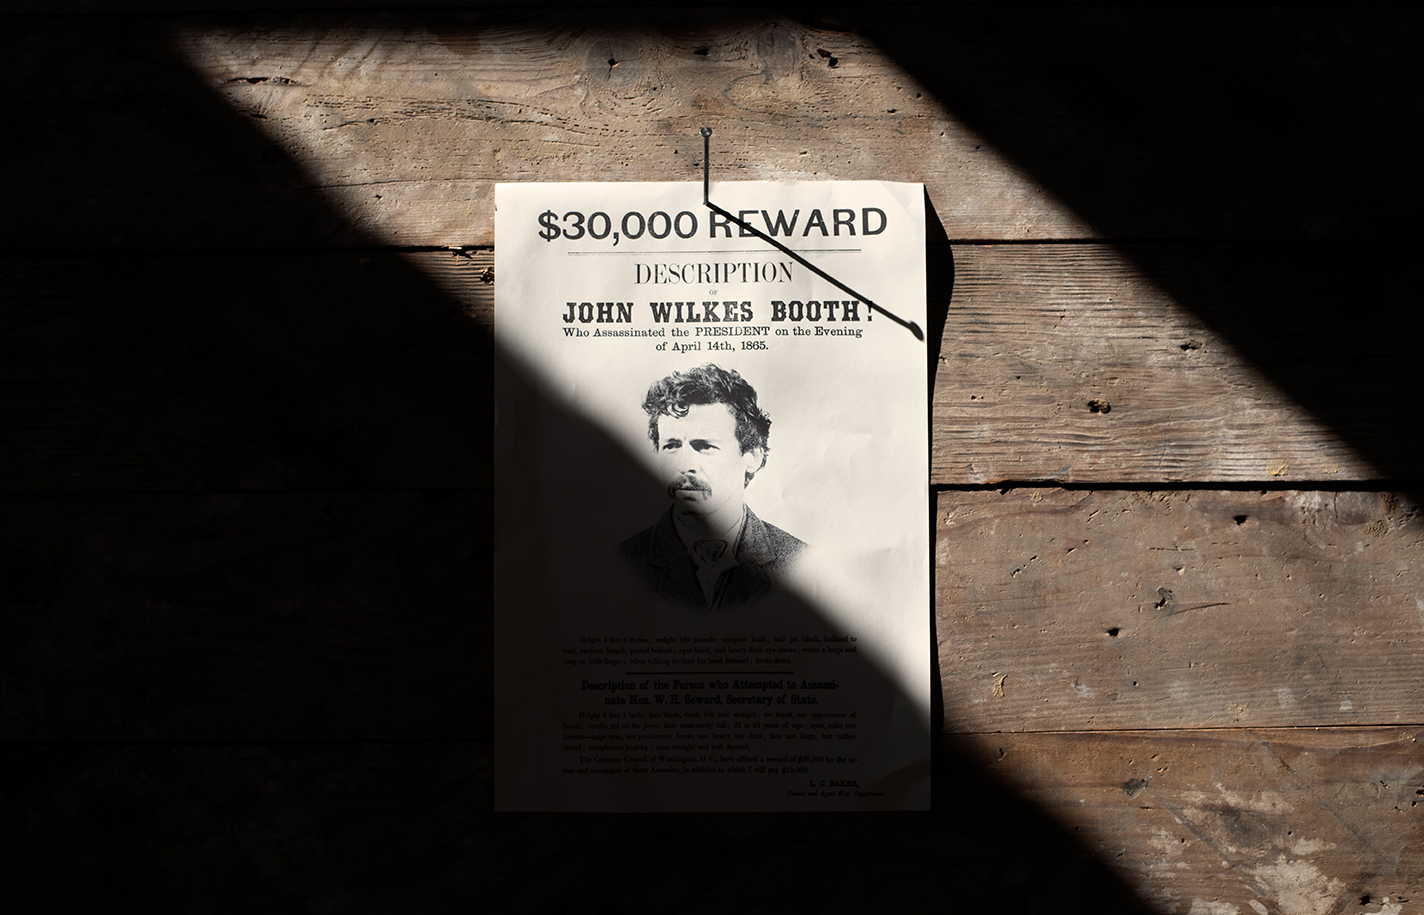 Graphic design in Apple TV's Manhunt; wanted poster